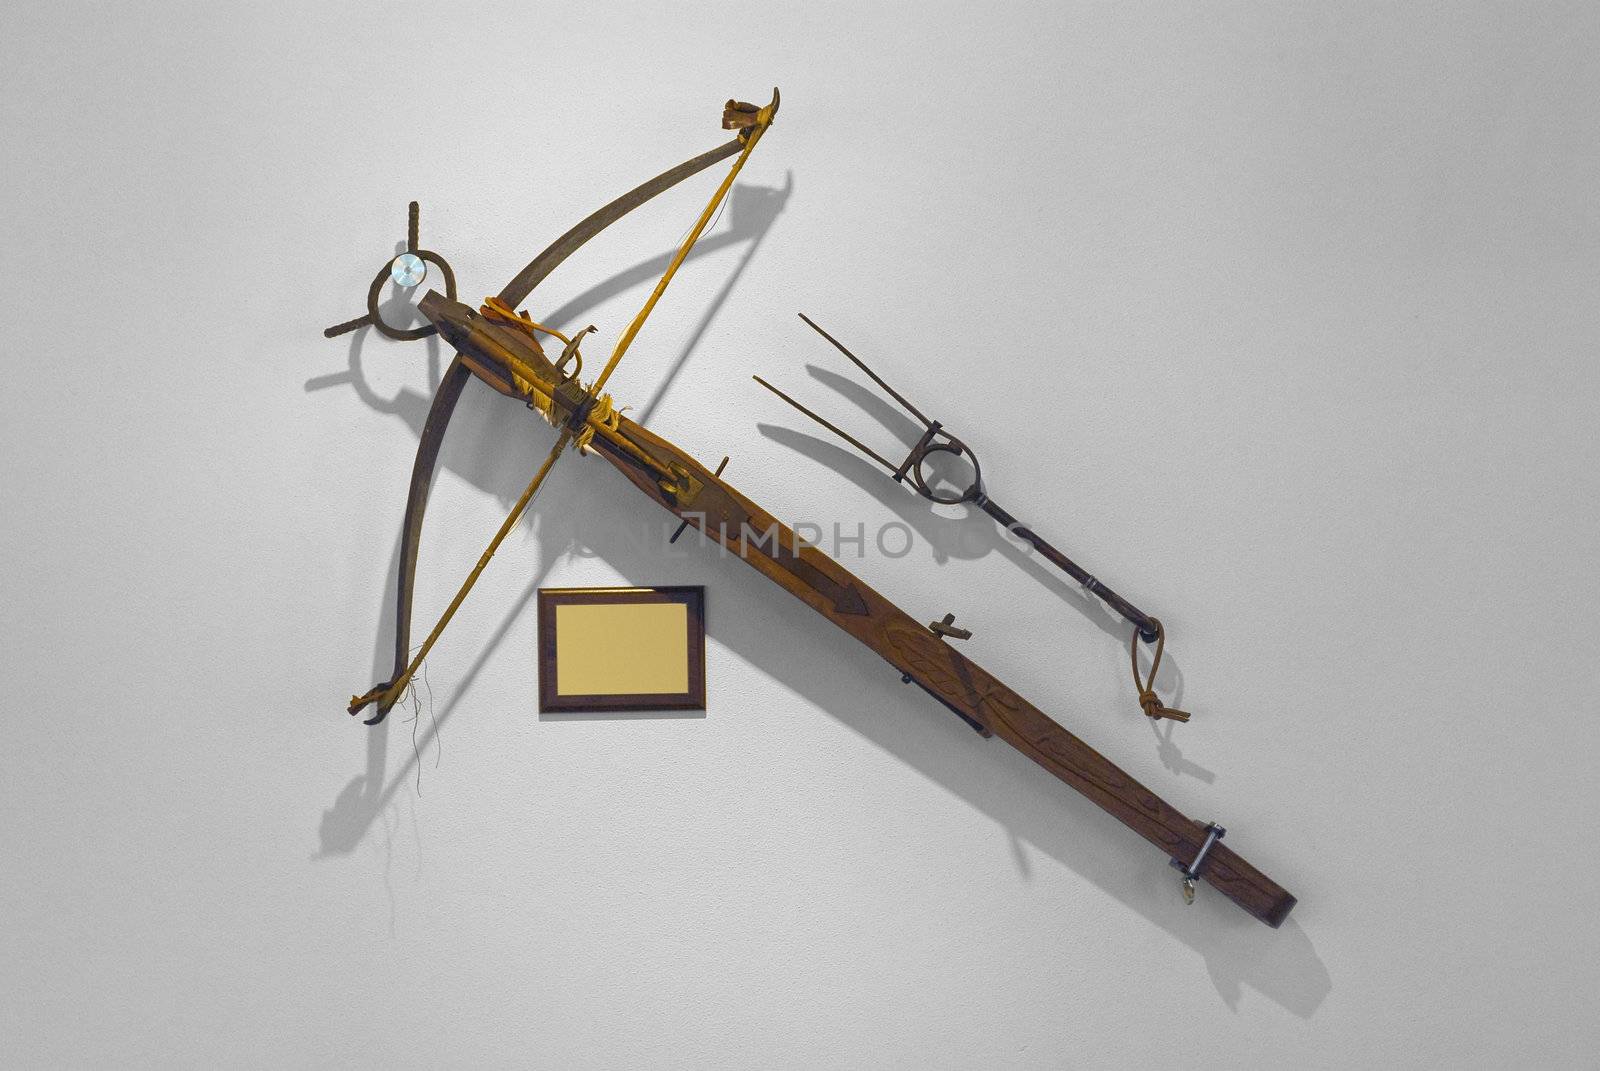 Antique crossbow in exposition with plaque